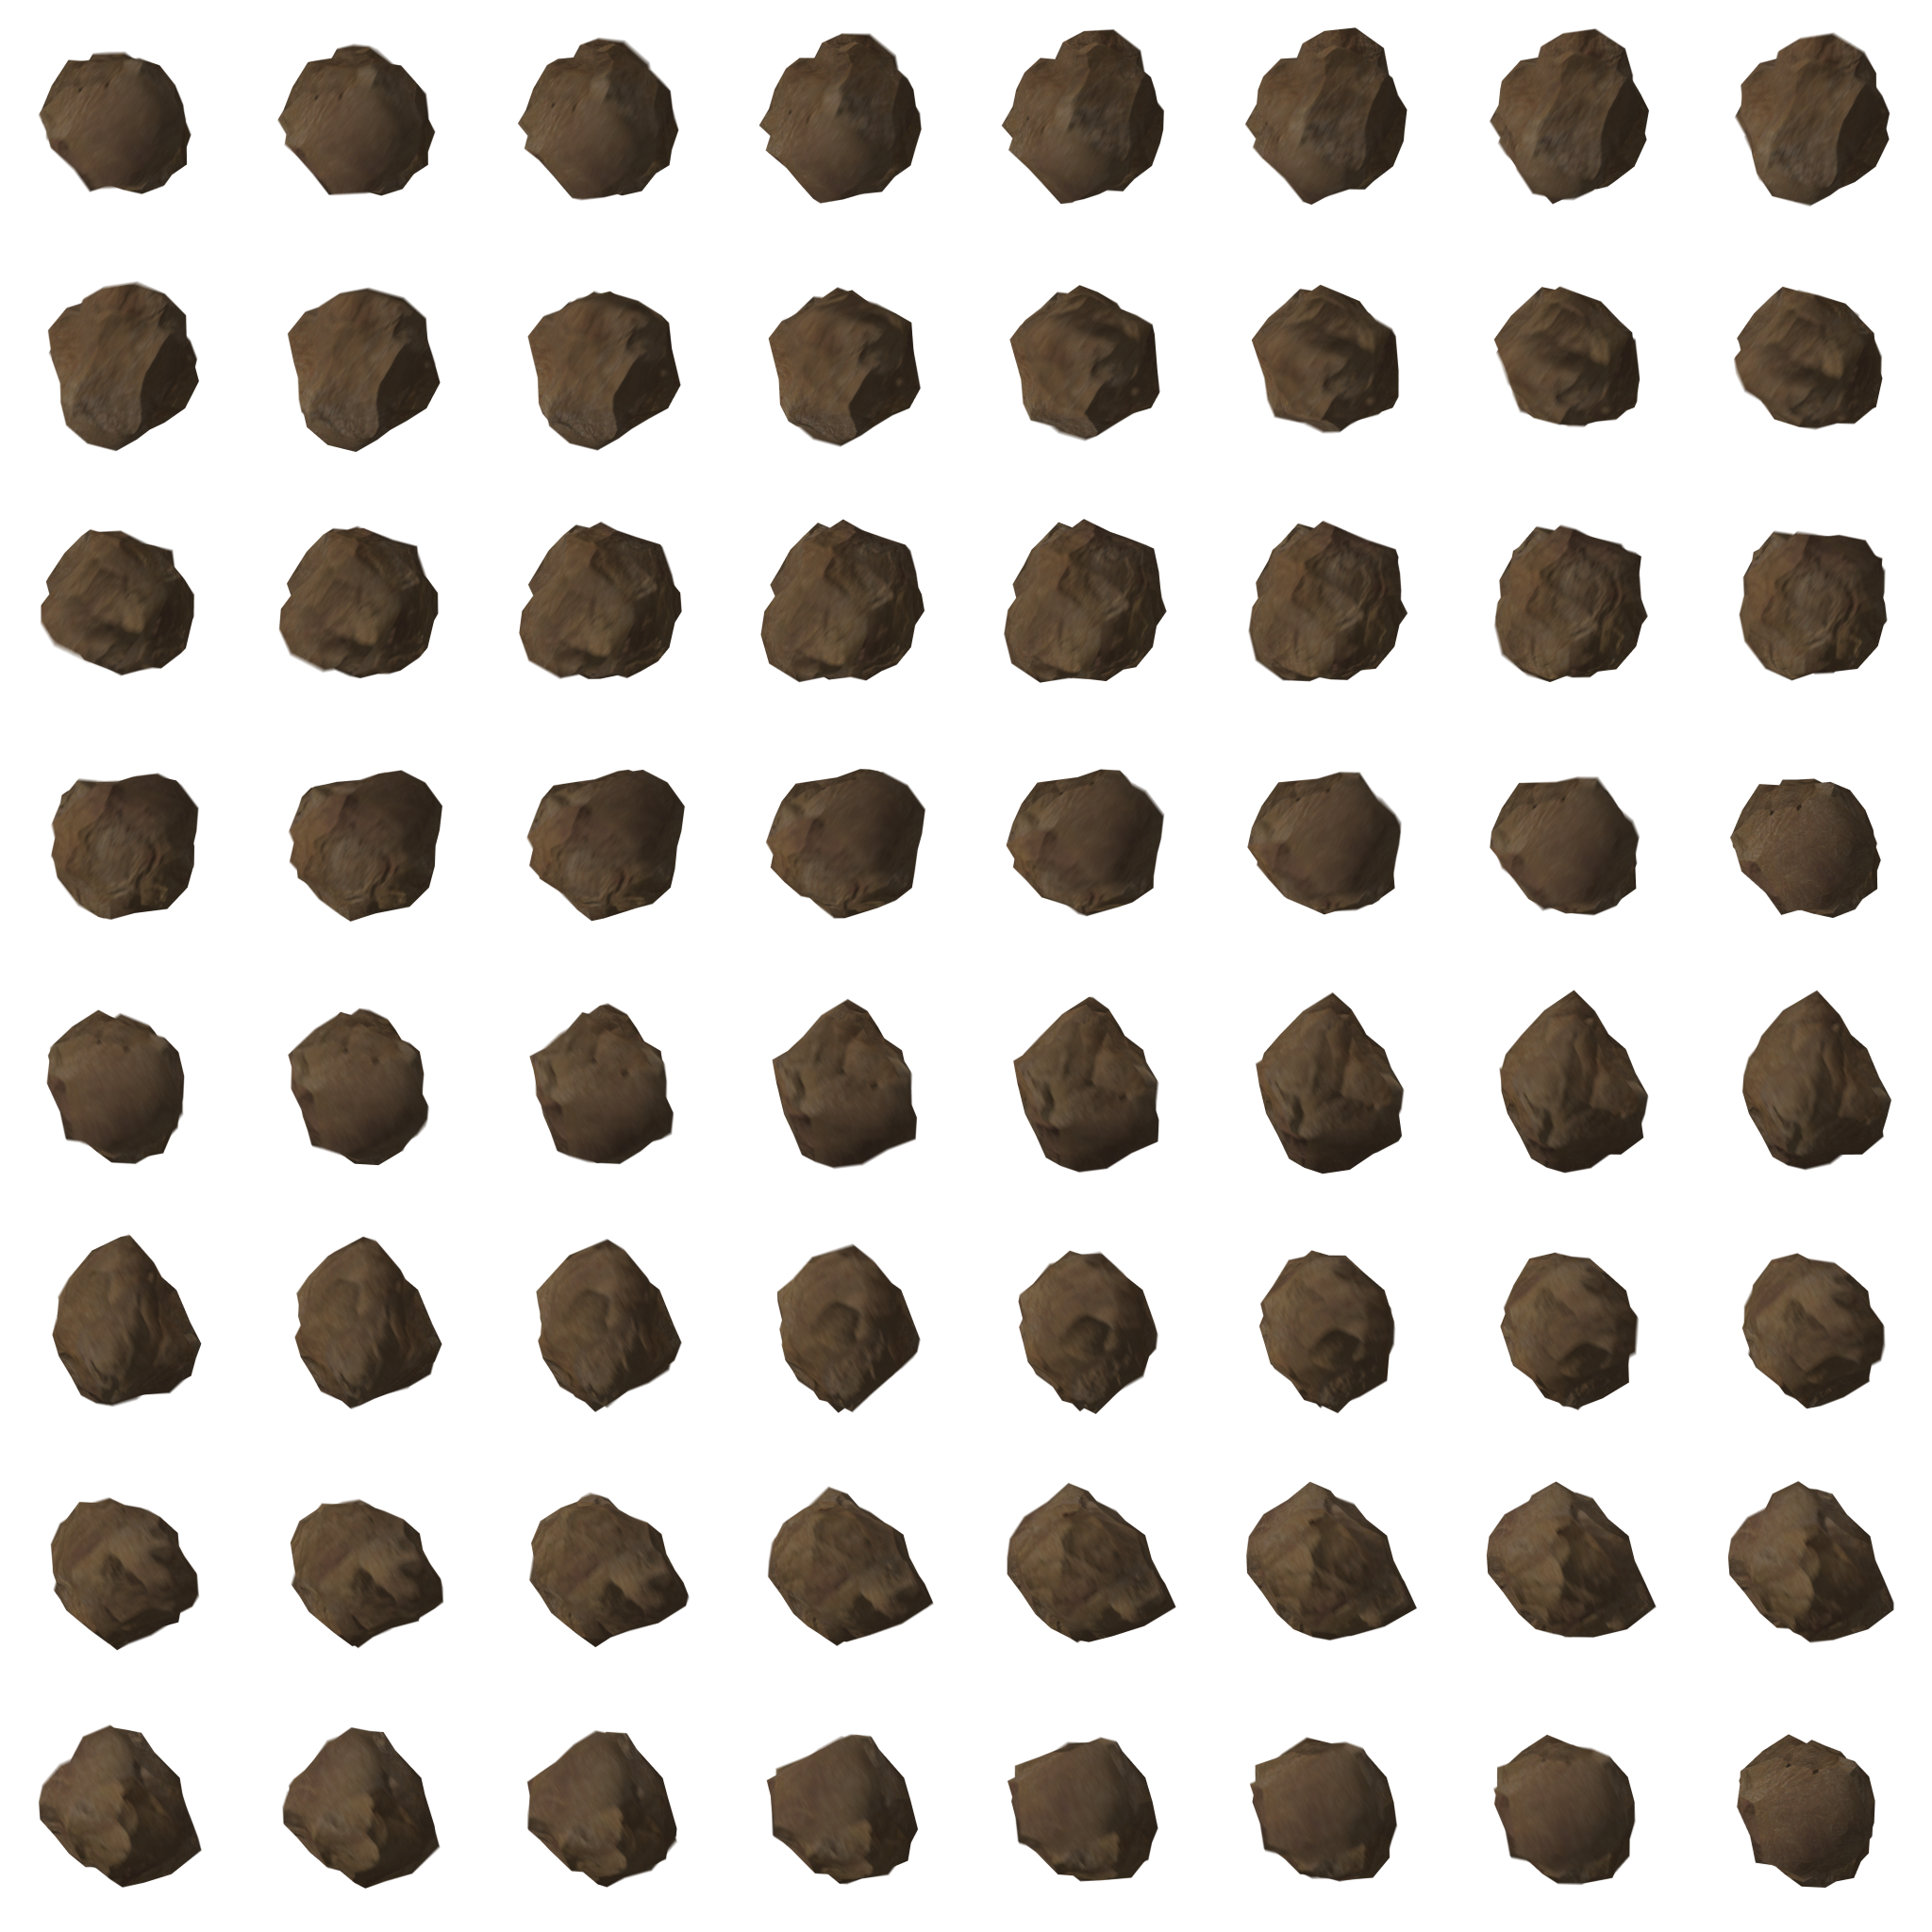 rocks_rotated.png